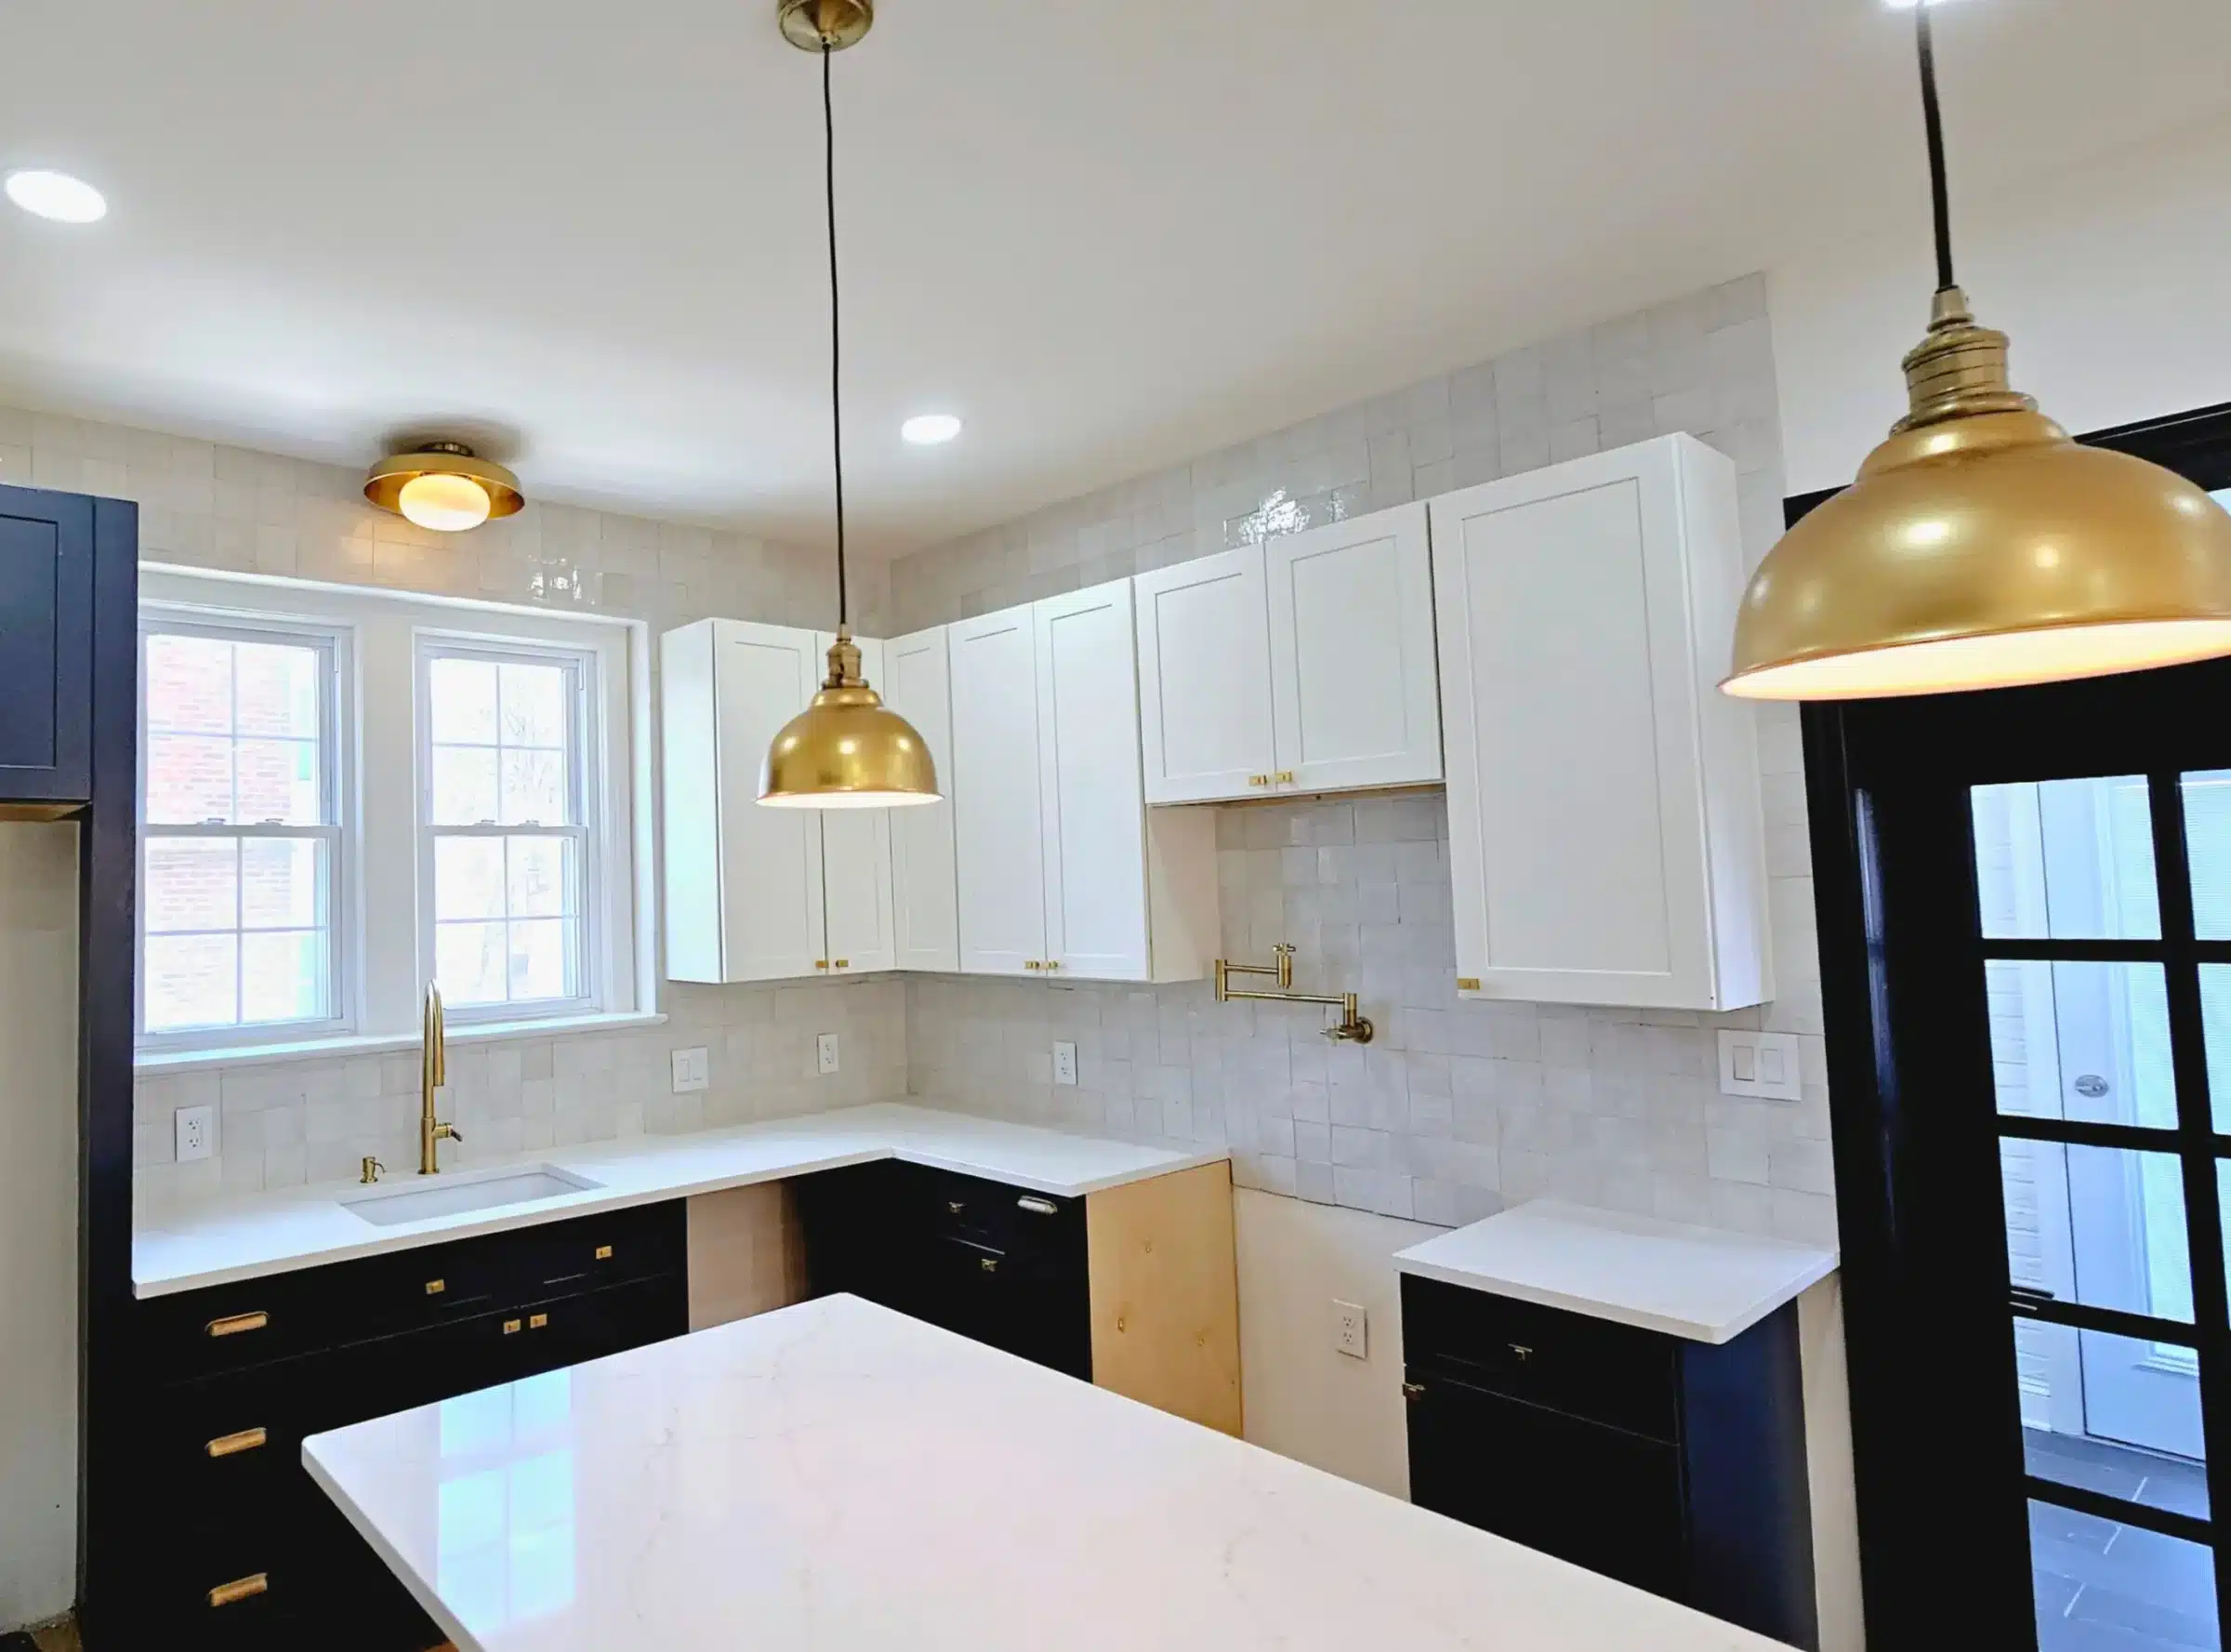 kitchen and bathroom remodeling companies in dc by the home atlas